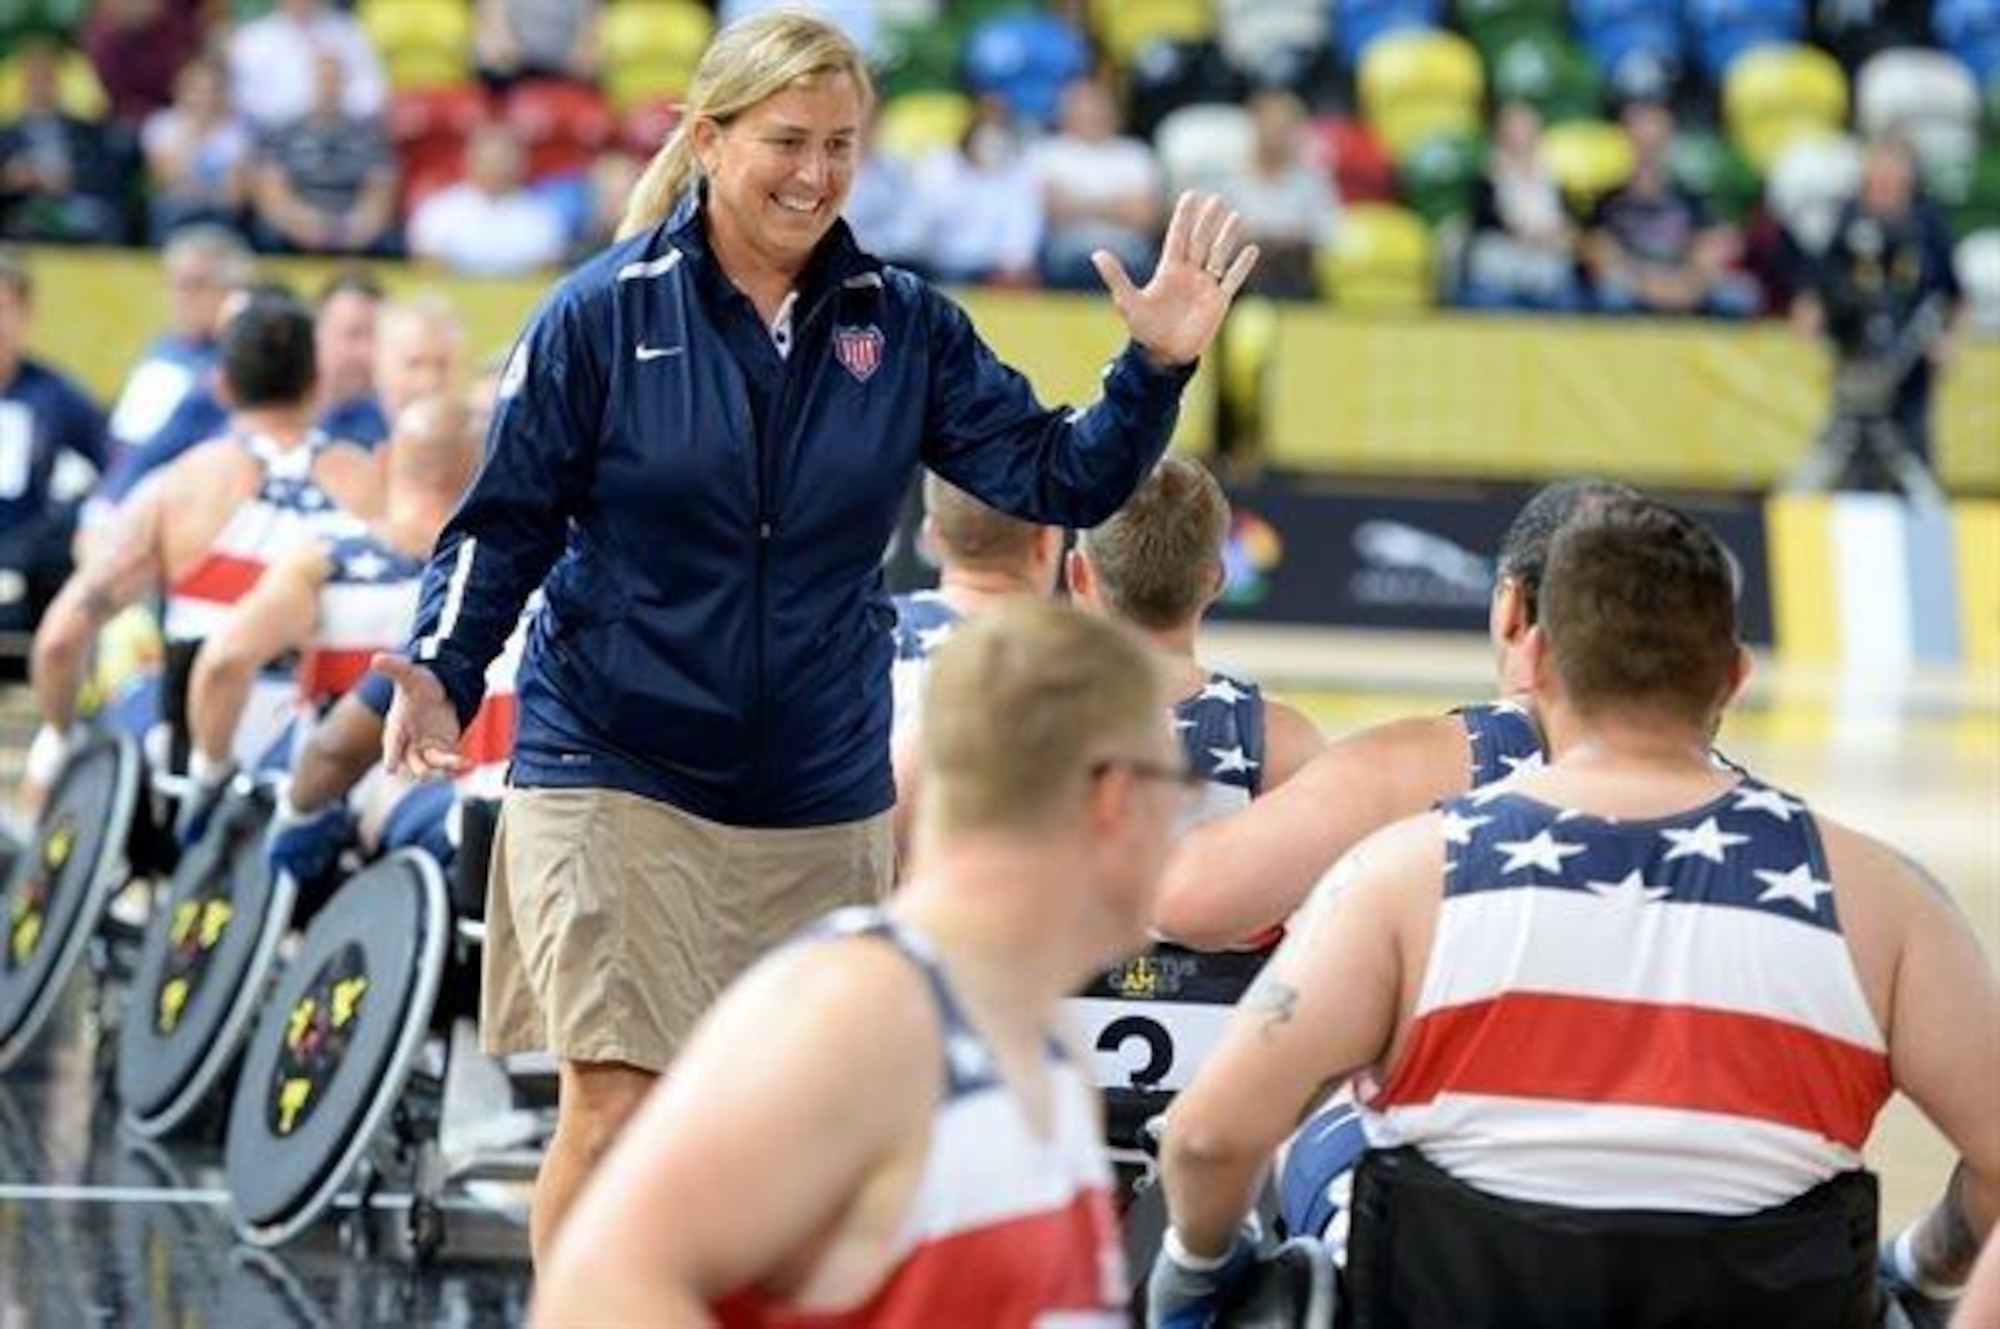 The American wheelchair rugby coach congratulates her team after their 14-4 victory over Australia in a wheelchair rugby match Sept. 12, 2014, at the 2014 Invictus Games in London. Invictus Games is an international competition that brings together wounded, injured and ill service members in the spirit of friendly athletic competition. American Soldiers, Sailors, Airmen and Marines are representing the U.S. in the competition which is taking place Sept. 10-14. (U.S. Navy photo/Mass Communication Specialist 2nd Class Joshua D. Sheppard)
